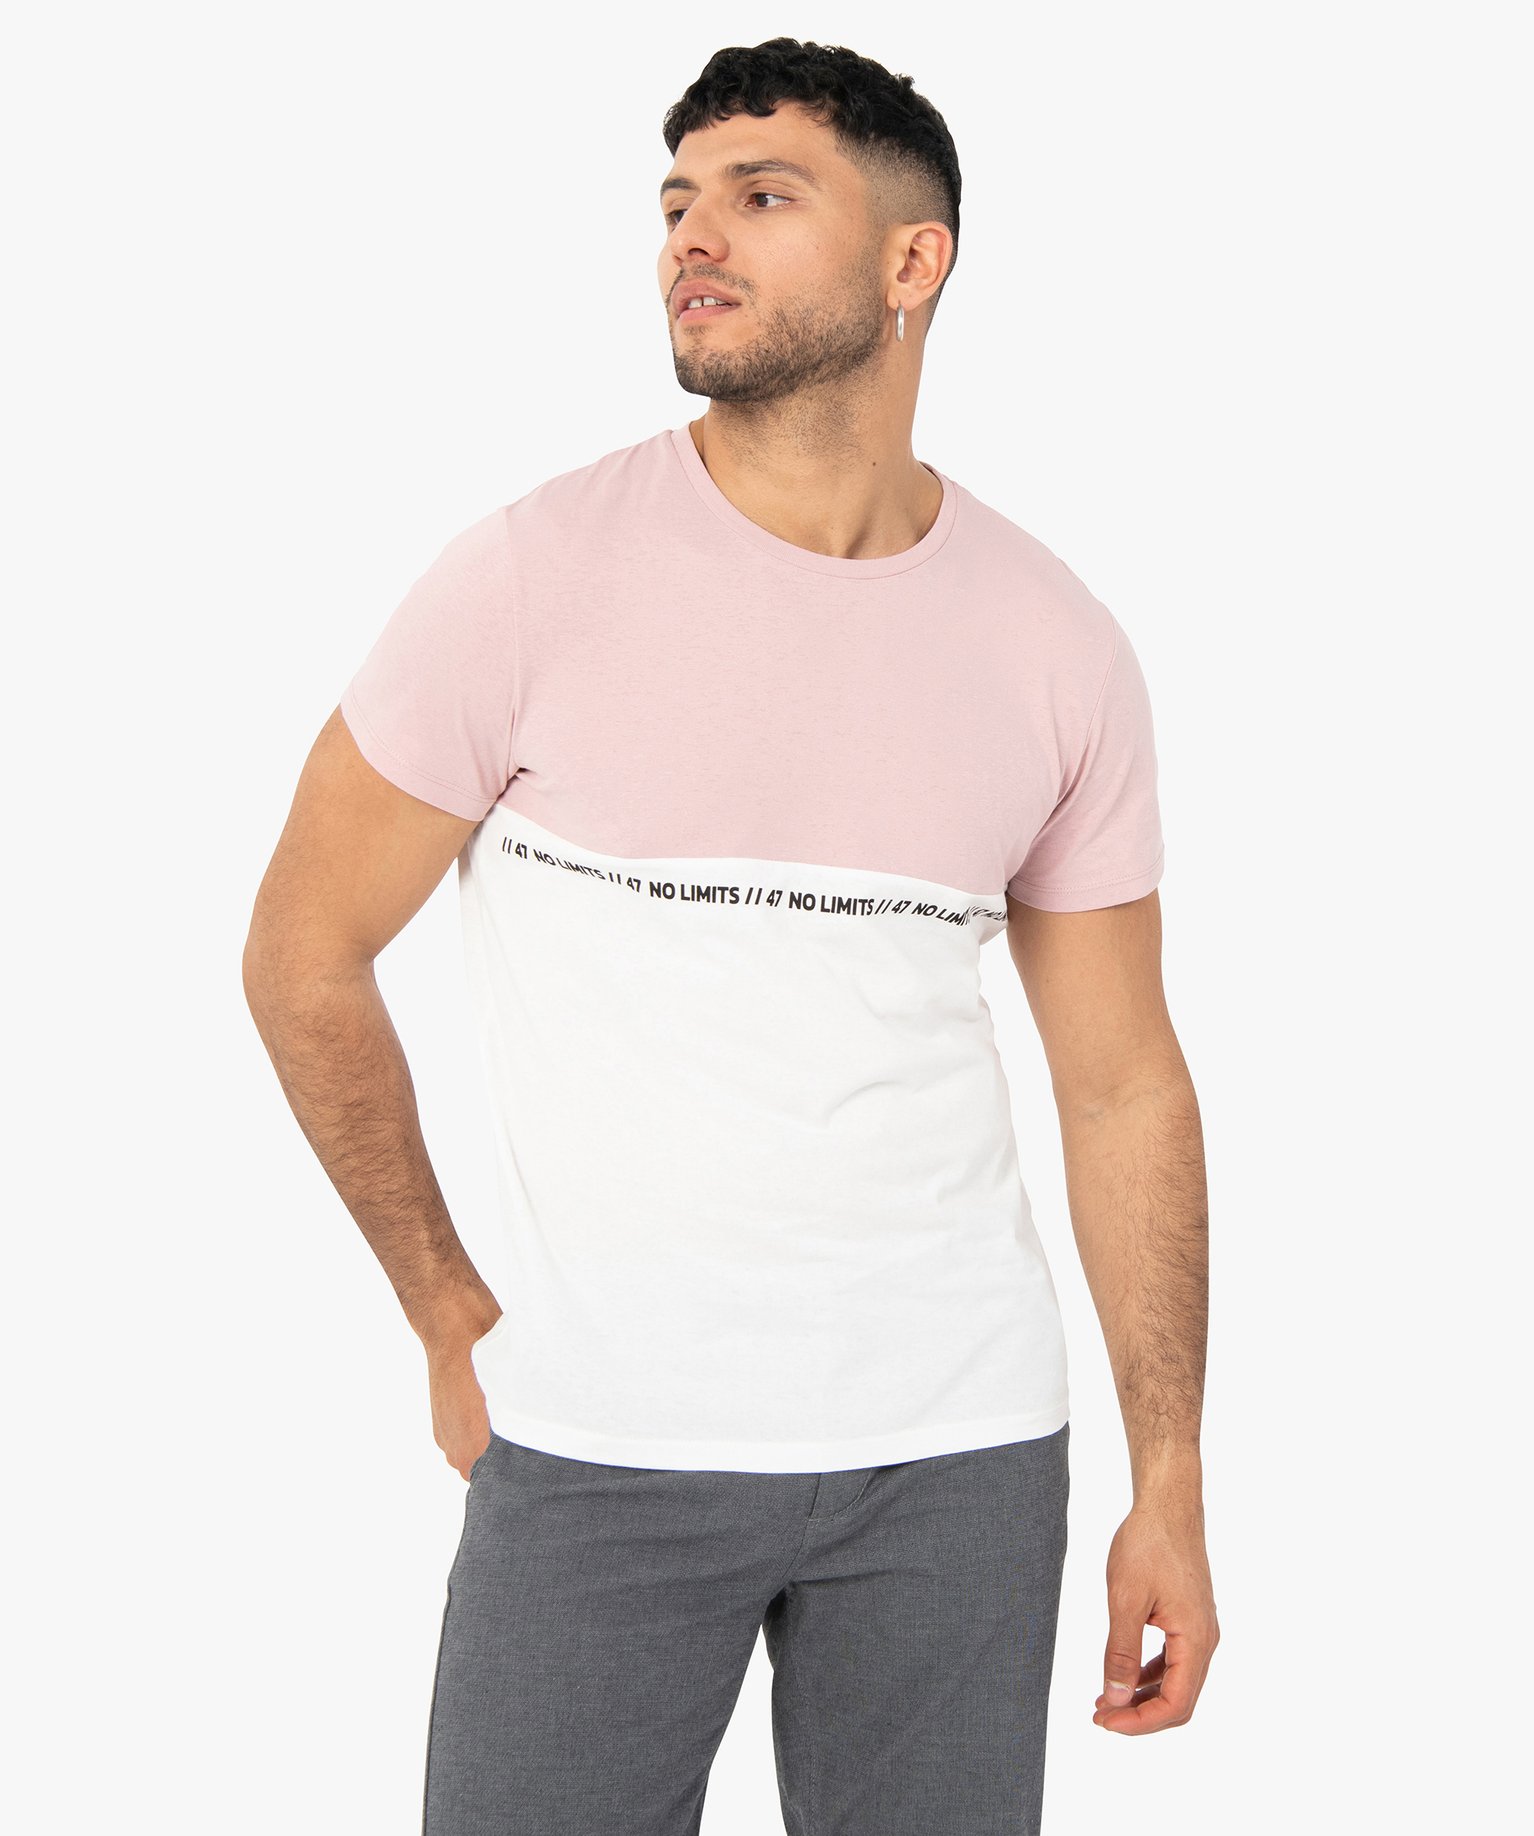 tee-shirt homme a manches courtes bicolore rose tee-shirts